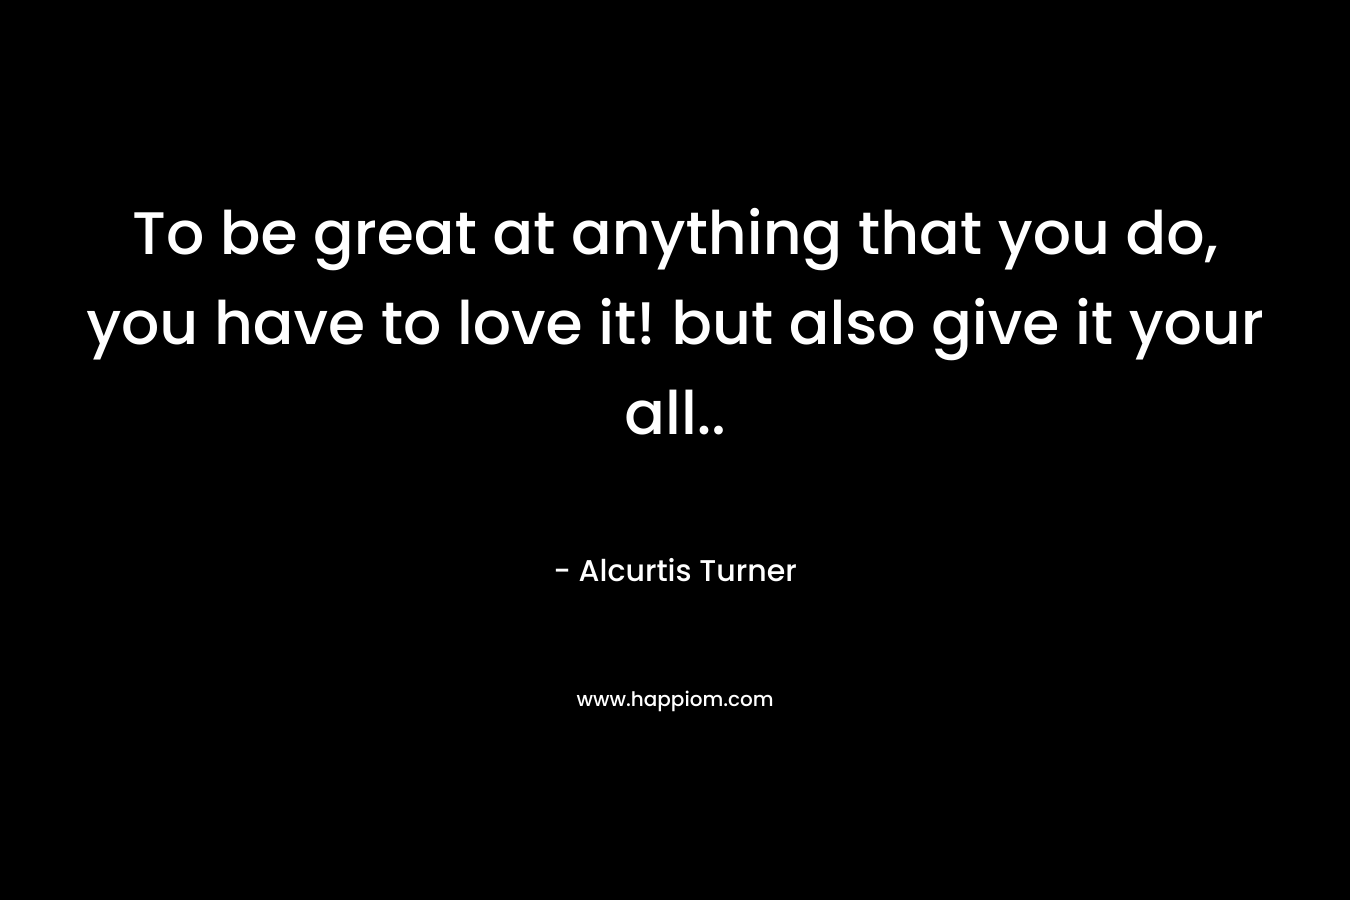 To be great at anything that you do, you have to love it! but also give it your all..